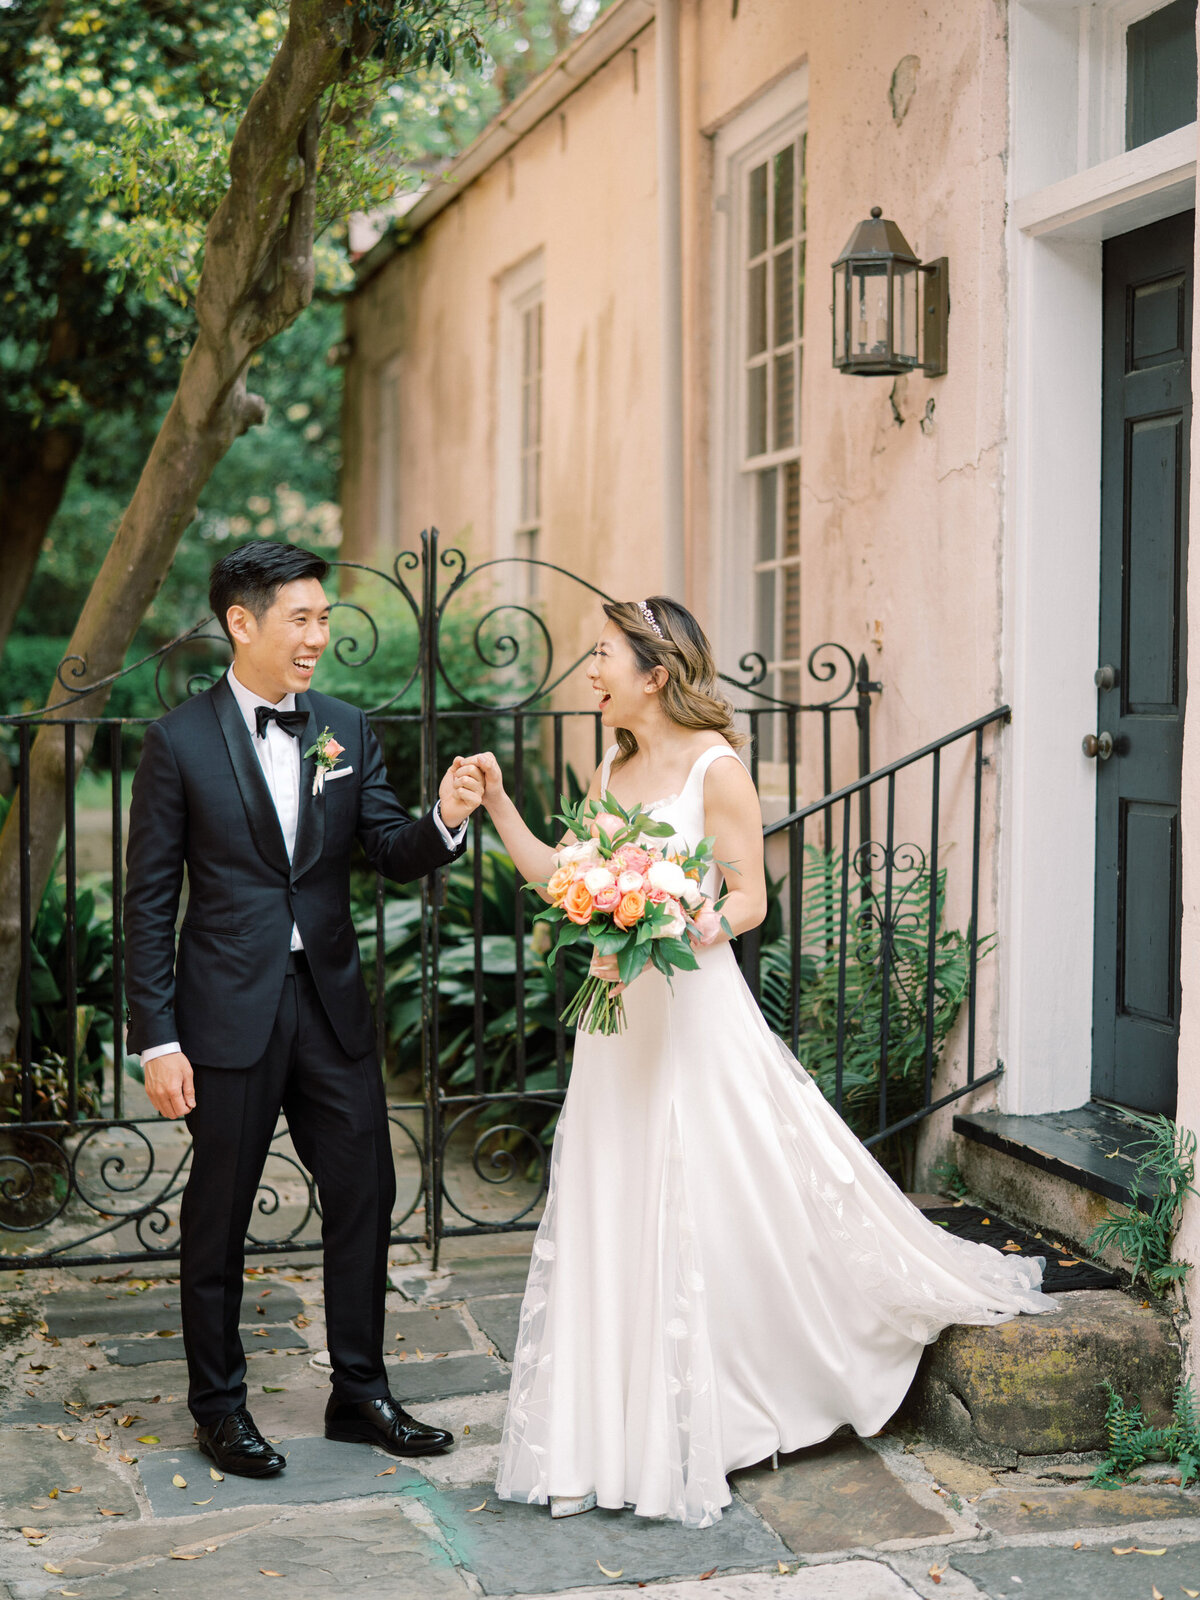 Cannon-Green-Wedding-in-charleston-photo-by-philip-casey-photography-059